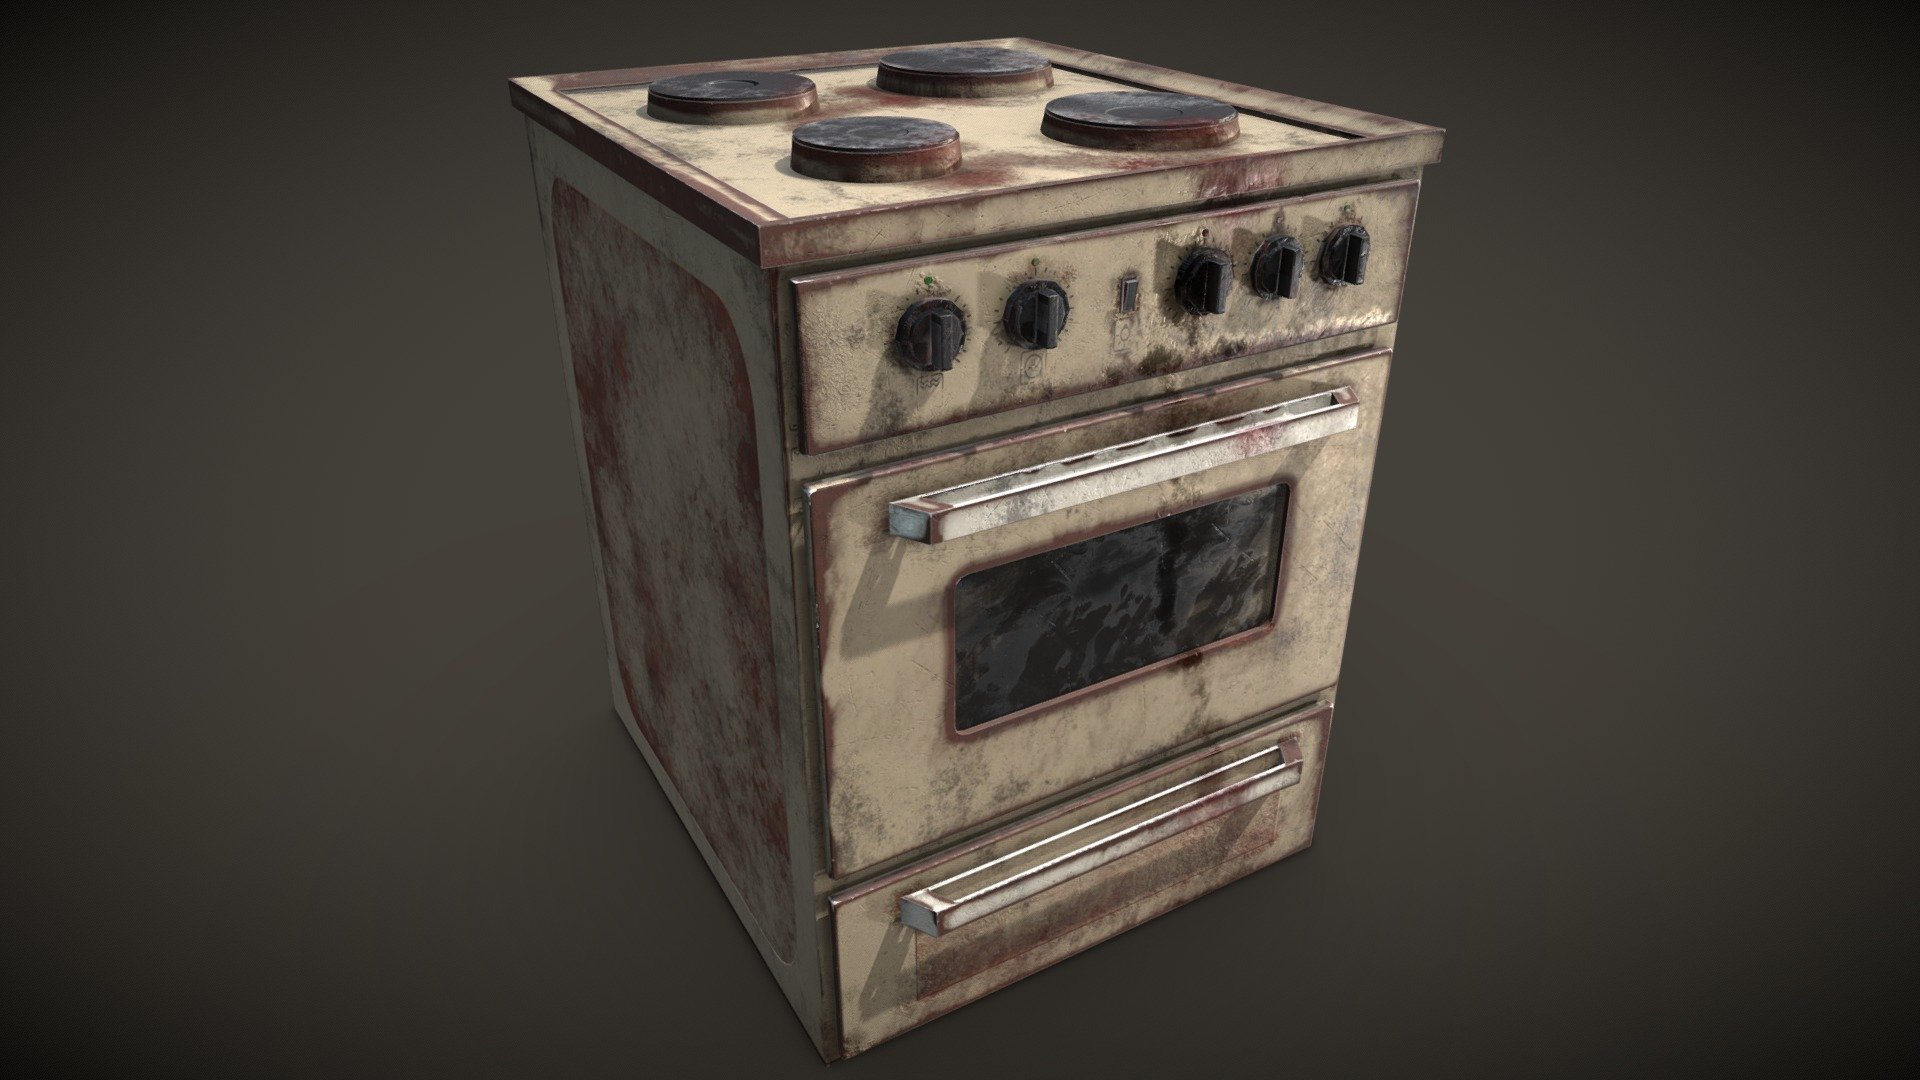 Small old Rusted oven, stains and dirt.  Useful prop for game enviroment. 

4K PBR textures 3d model